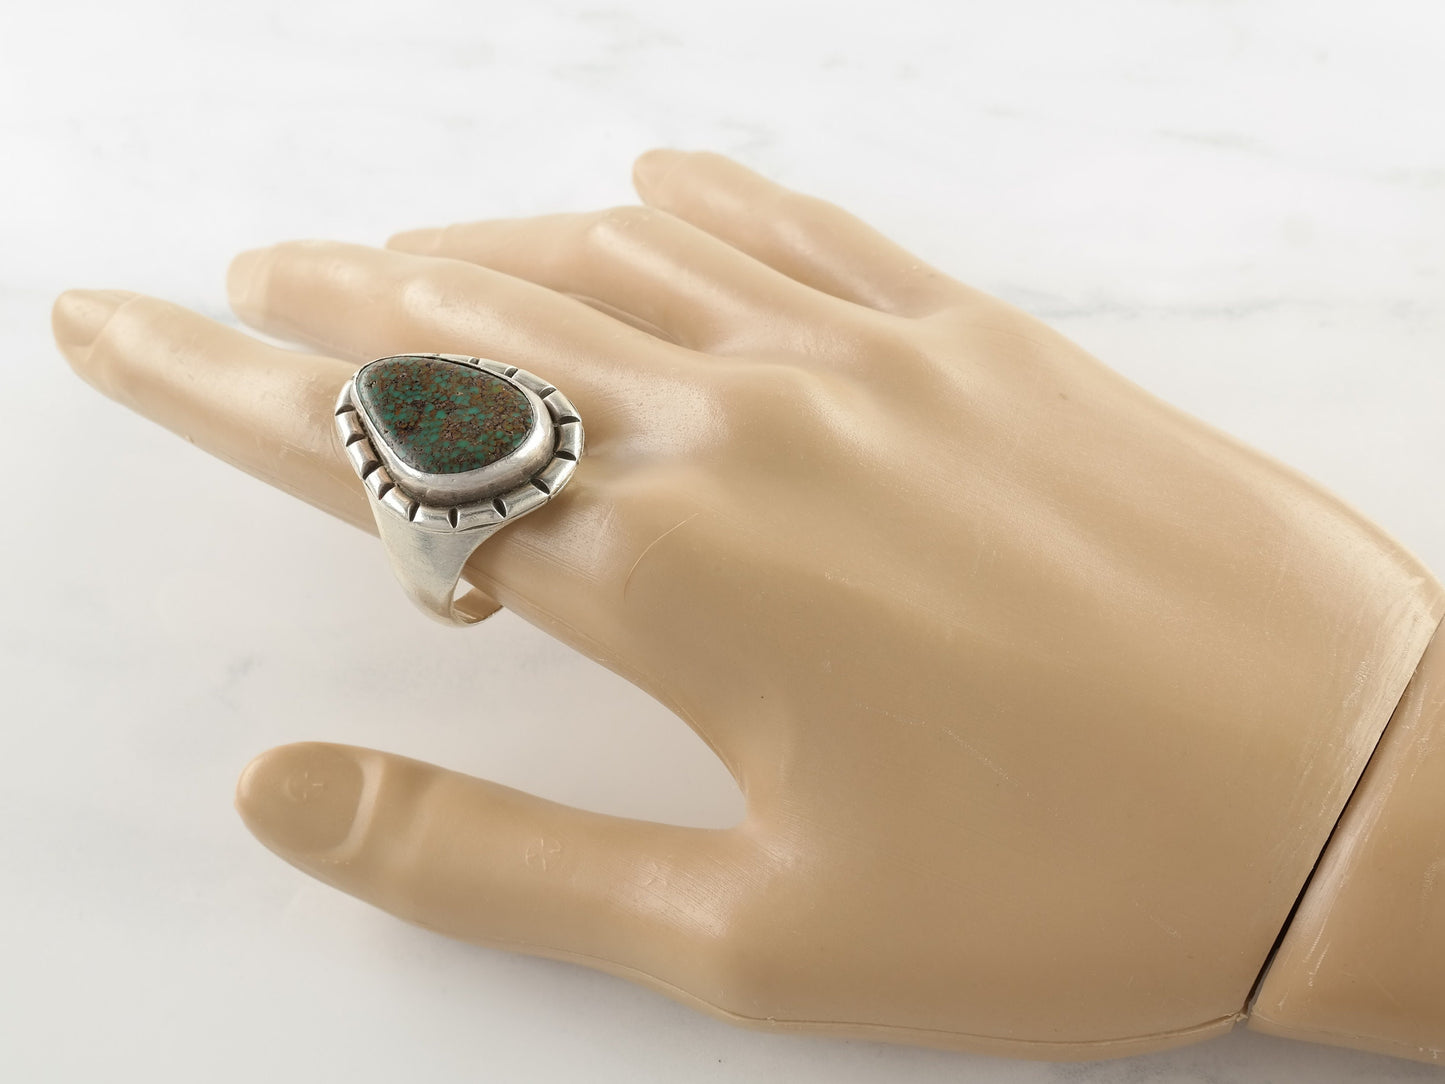 Vintage Native American Spiderweb Turquoise Ring Sterling Silver Size 12 1/2